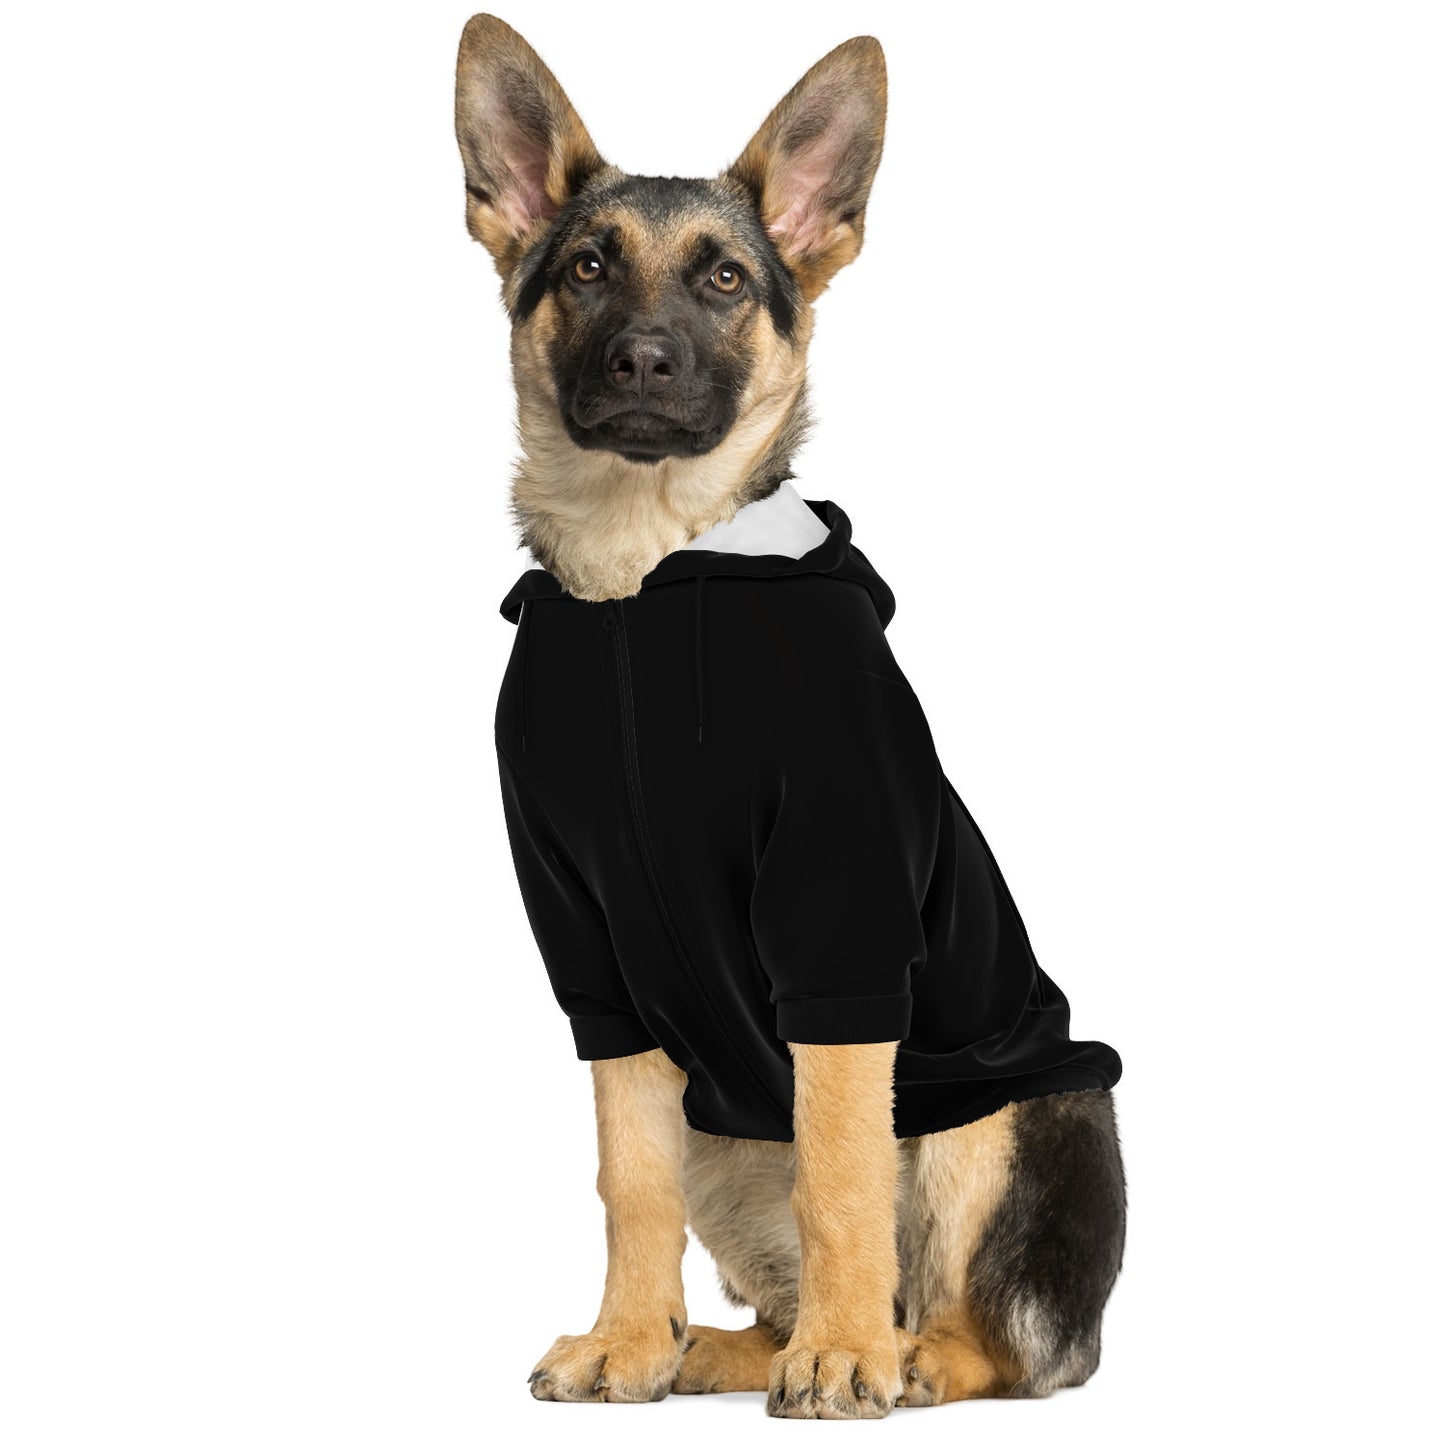 T Shirt For Dogs | My Mom's A Fighter Breast Cancer Dog TShirt-Athletic Dog Zip-Up Hoodie - AOP-TD Gift Solutions.com